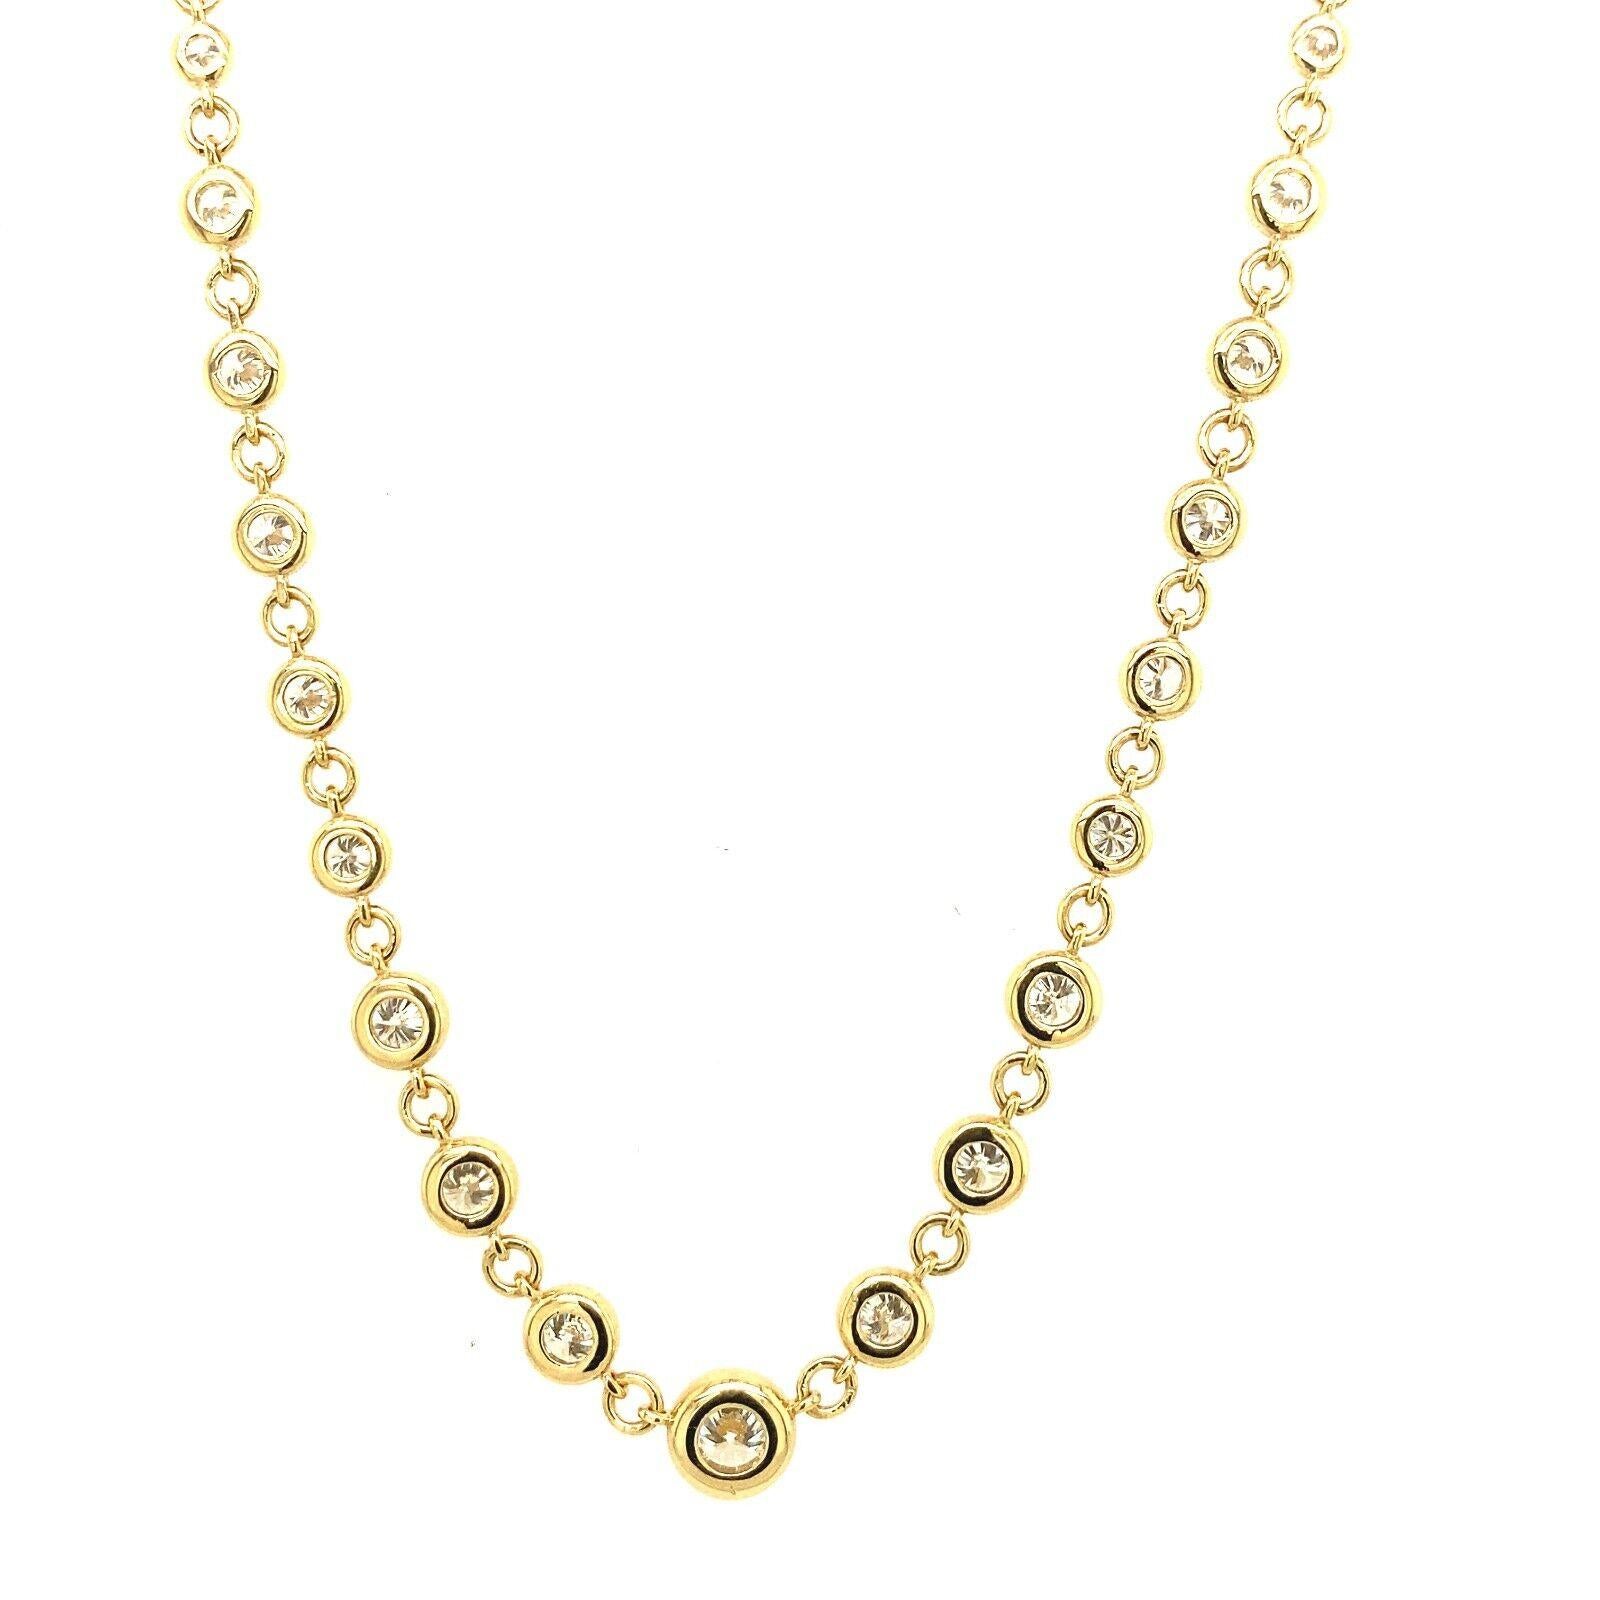 This necklace set features 53 natural Round Brilliant Cut Diamonds with the total weight of 2.67ct. The Diamonds are set in 18ct Yellow Gold, and total length of the necklace is 17 inches. It is perfect for any occasion and is a great gift for a